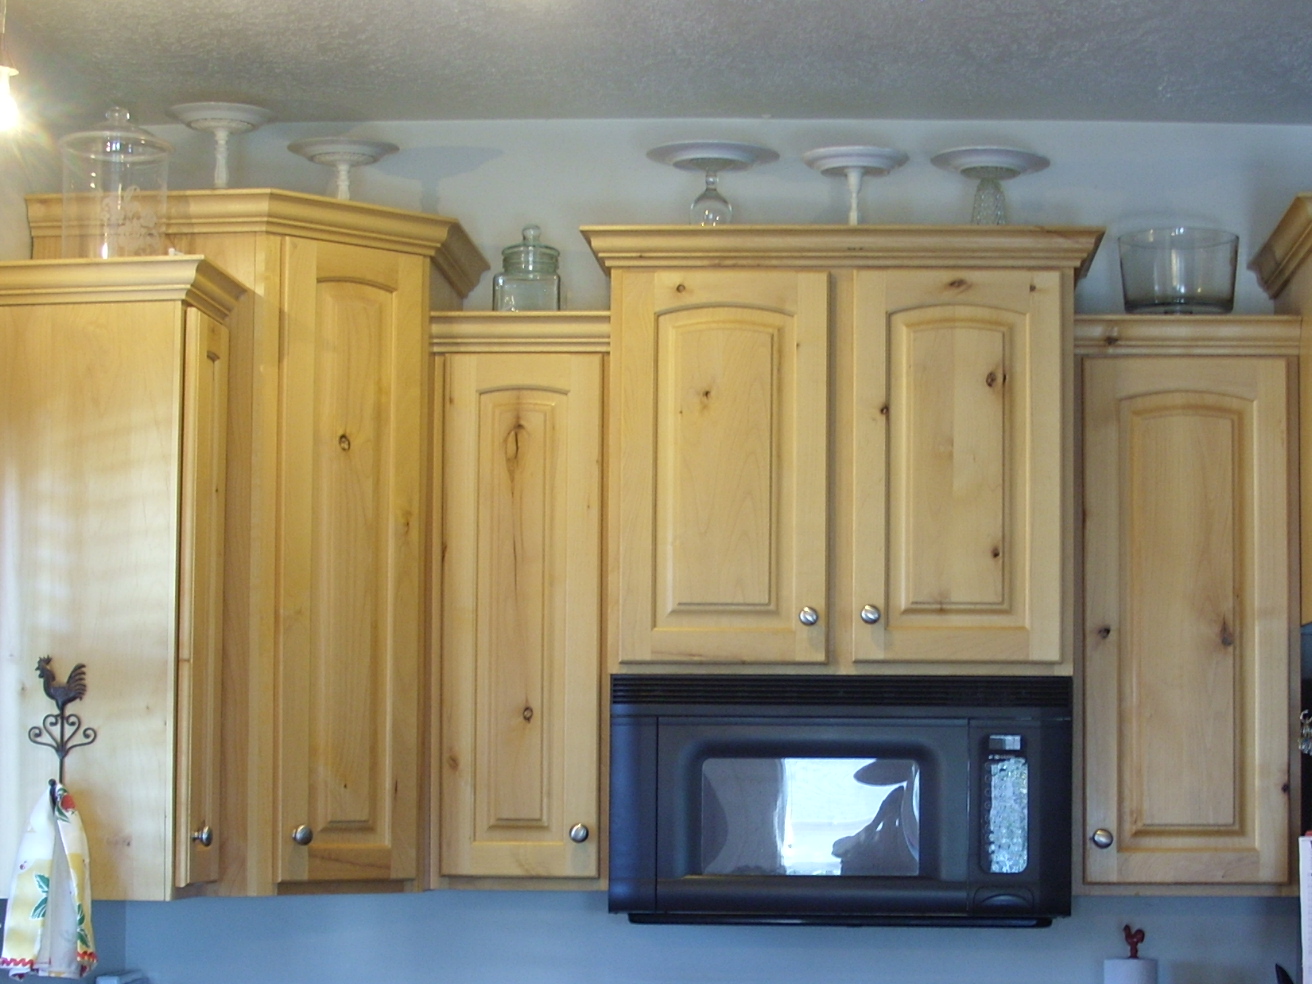 Decorating the Top of the Kitchen Cabinets - Organize and Decorate ...